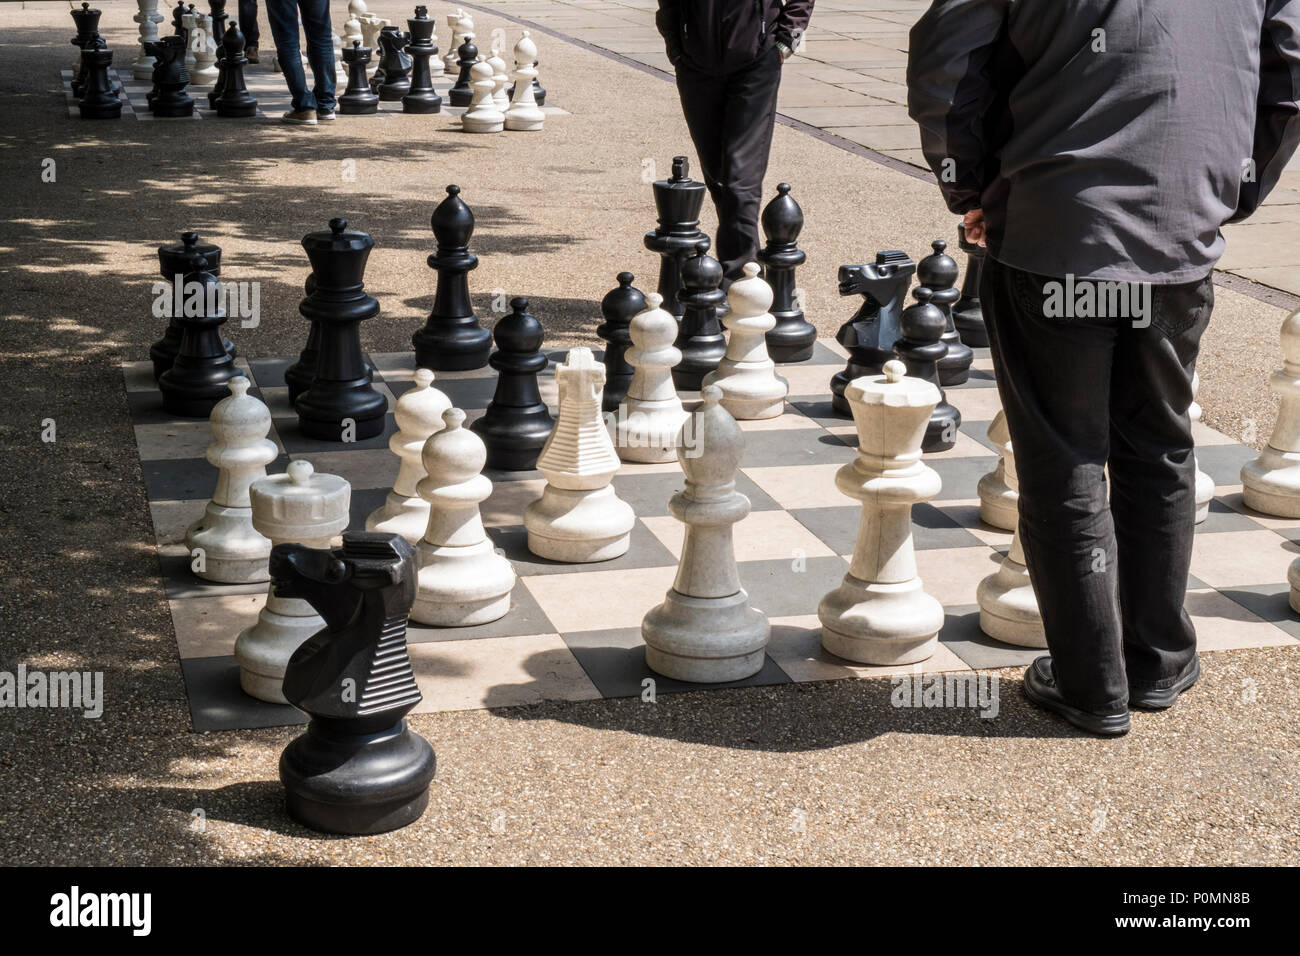 Two people considering their next move while playing chess outdoors with large pieces, Victoria Gardens, Leeds, West Yorkshire, England, UK Stock Photo